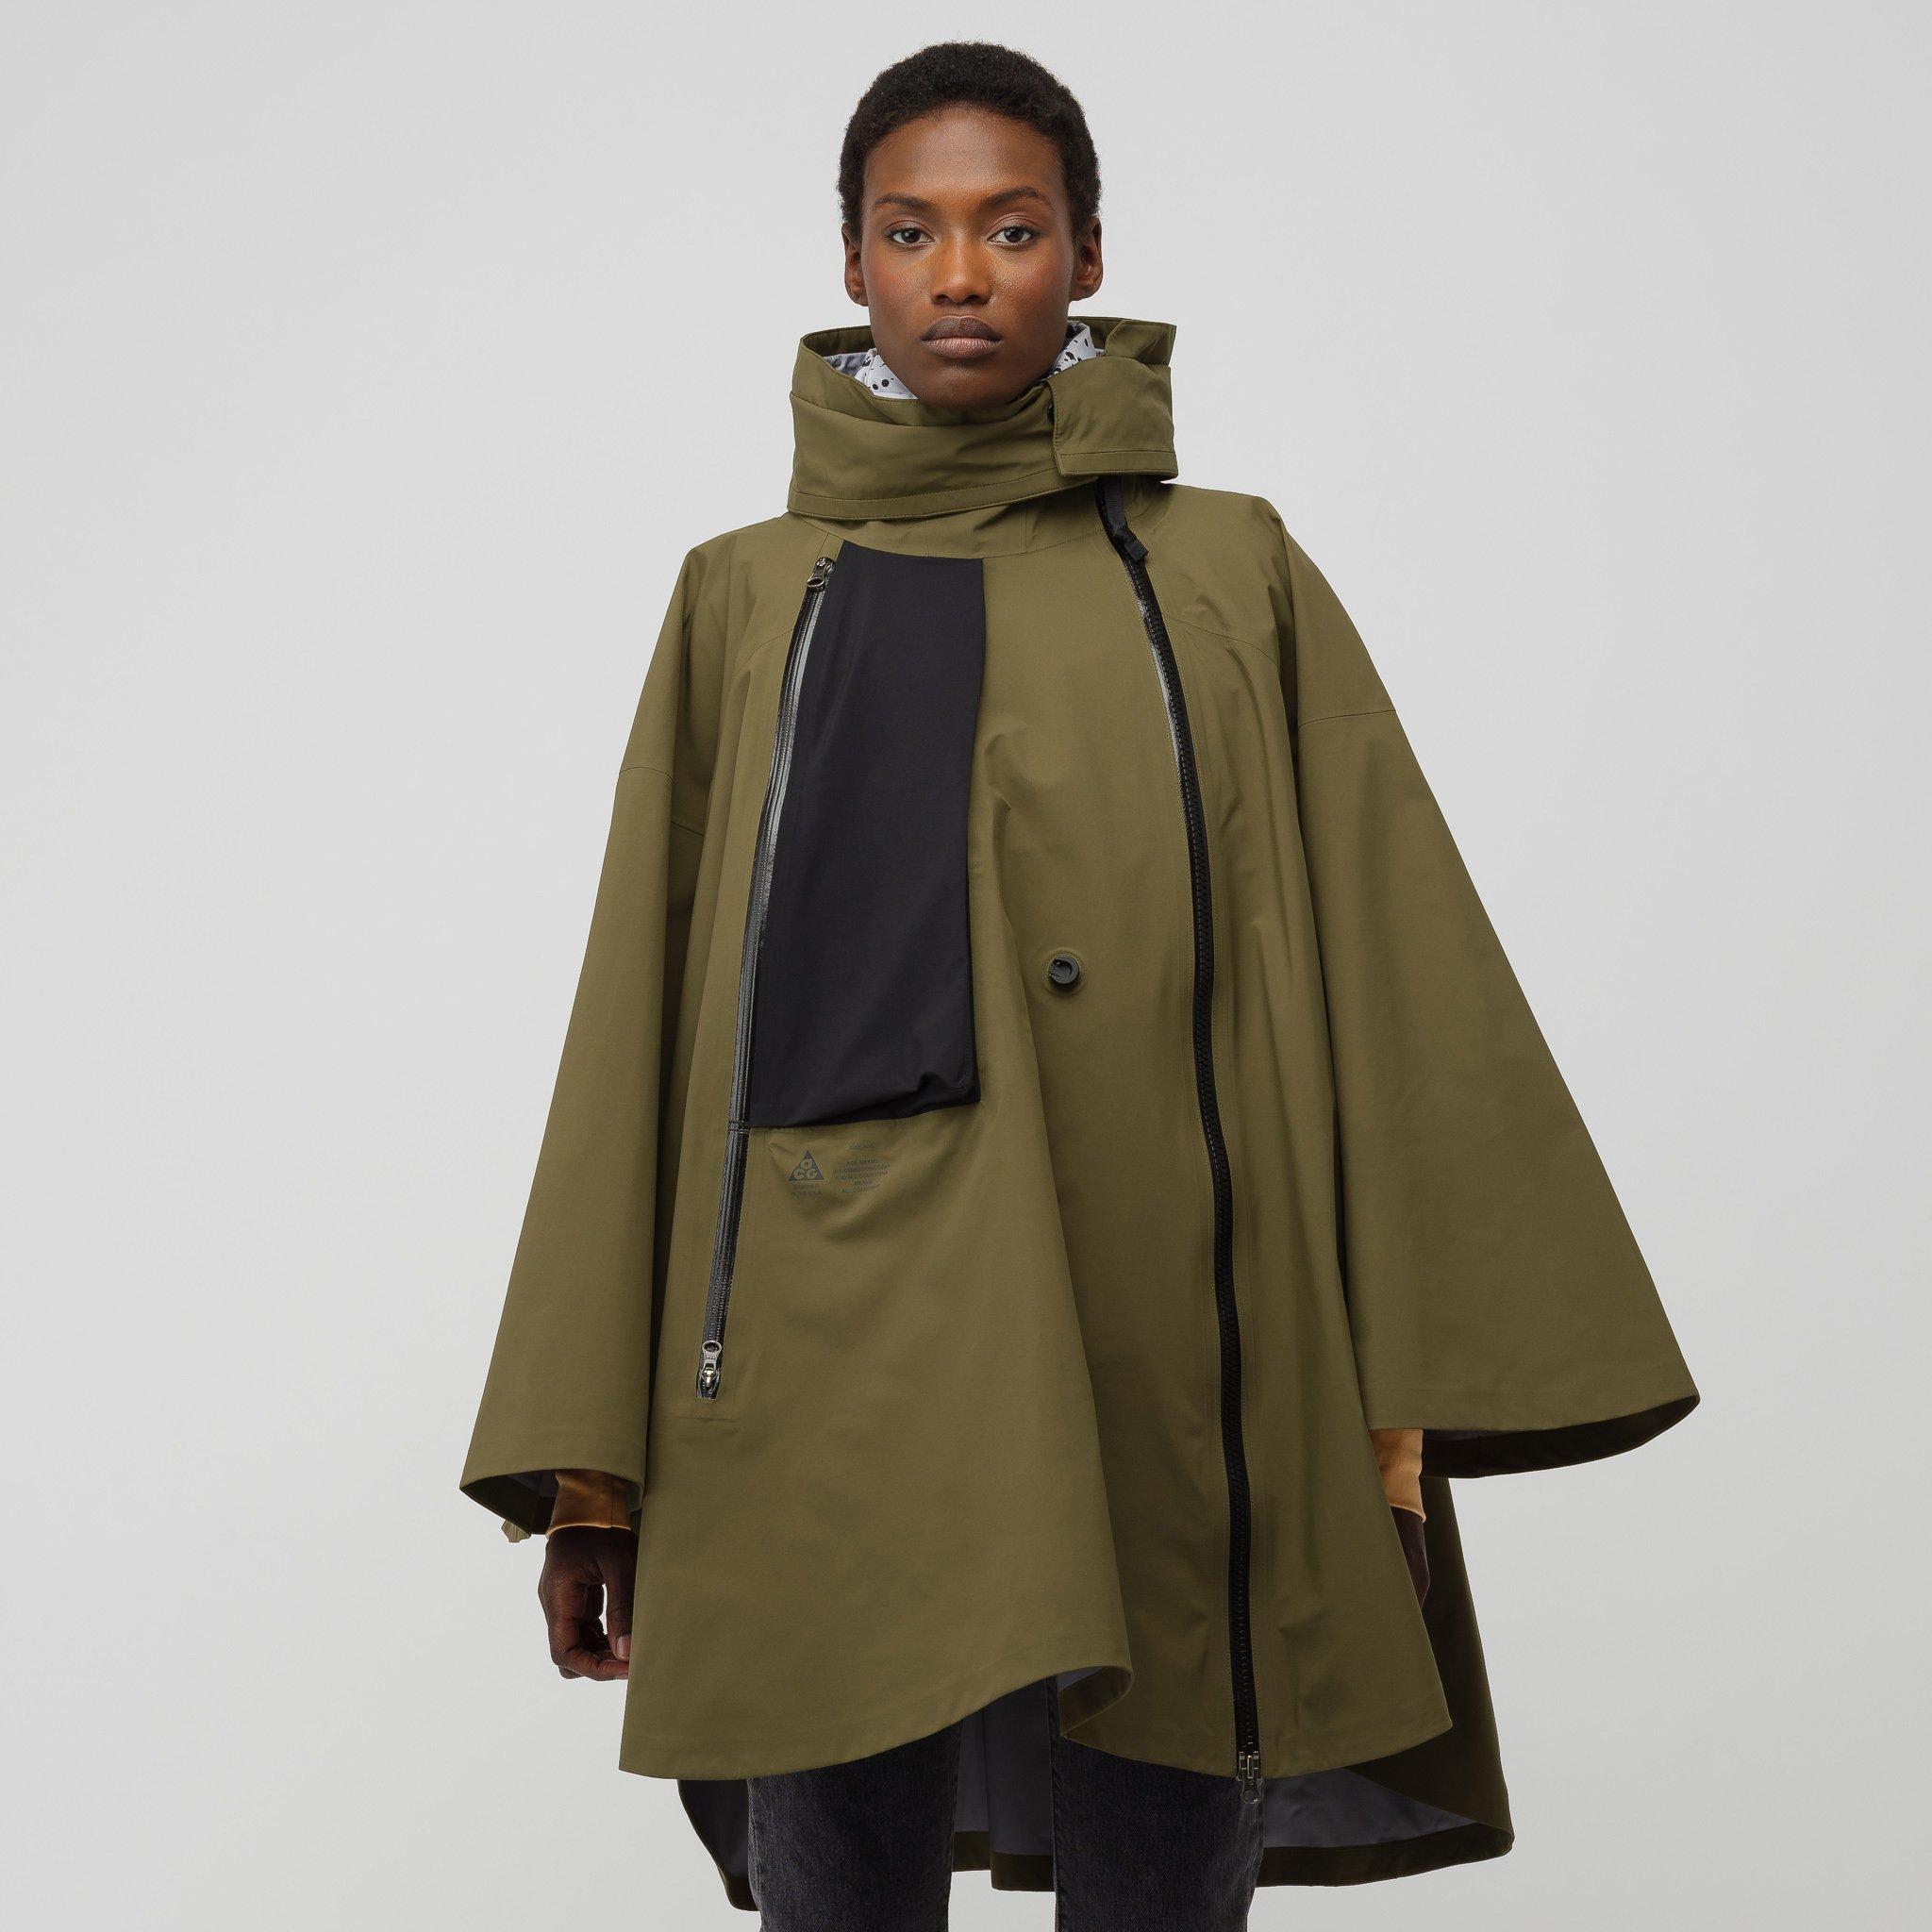 Nike Acg 3-in-1 System Poncho in Green | Lyst UK